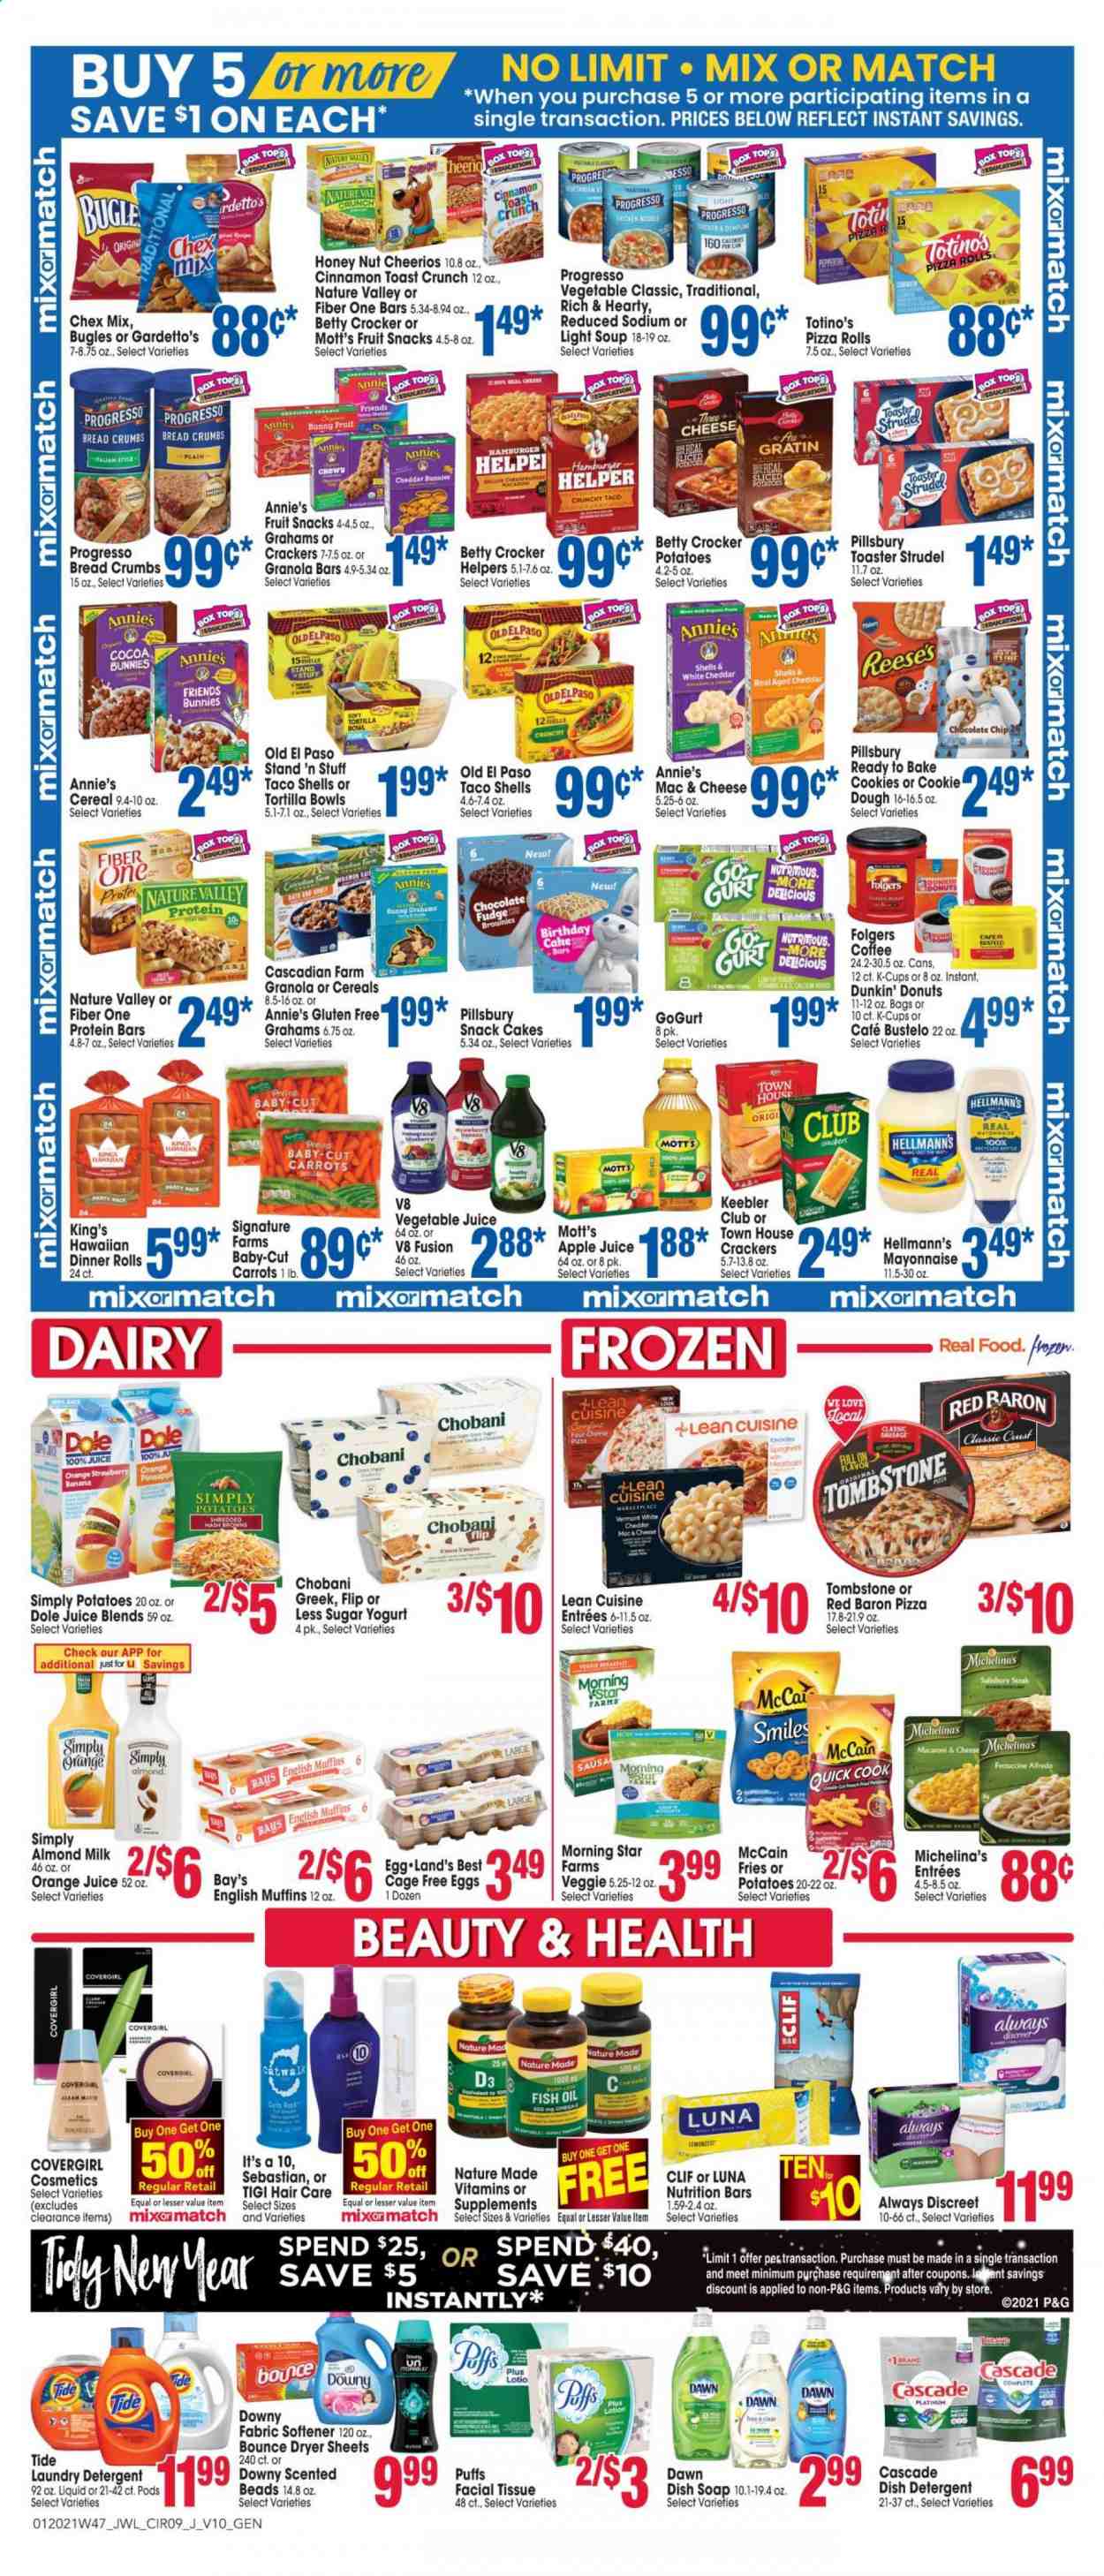 thumbnail - Jewel Osco Flyer - 01/20/2021 - 01/26/2021 - Sales products - Dole, bread, tortillas, pizza rolls, dinner rolls, Old El Paso, toast bread, puffs, cake, brownies, donut, muffin, strudel, Dunkin' Donuts, breadcrumbs, english muffins, macaroni & cheese, hash browns, pizza, soup, hamburger, Pillsbury, Progresso, Lean Cuisine, Annie's, sausage, pepperoni, cheddar, yoghurt, Chobani, almond milk, eggs, cage free eggs, mayonnaise, Hellmann’s, Reese's, carrots, McCain, potato fries, Red Baron, cookie dough, cookies, fudge, crackers, fruit snack, Keebler, Chex Mix, cocoa, cereals, Cheerios, nutrition bar, protein bar, granola bar, Nature Valley, Fiber One, spaghetti, cinnamon, fish oil, apple juice, orange juice, juice, vegetable juice, Bai, Mott's, coffee, Folgers, coffee capsules, K-Cups, steak, tissues, detergent, Cascade, Tide, fabric softener, laundry detergent, Bounce, dryer sheets, soap, Always Discreet, bowl, Nature Made, vitamin D3. Page 9.